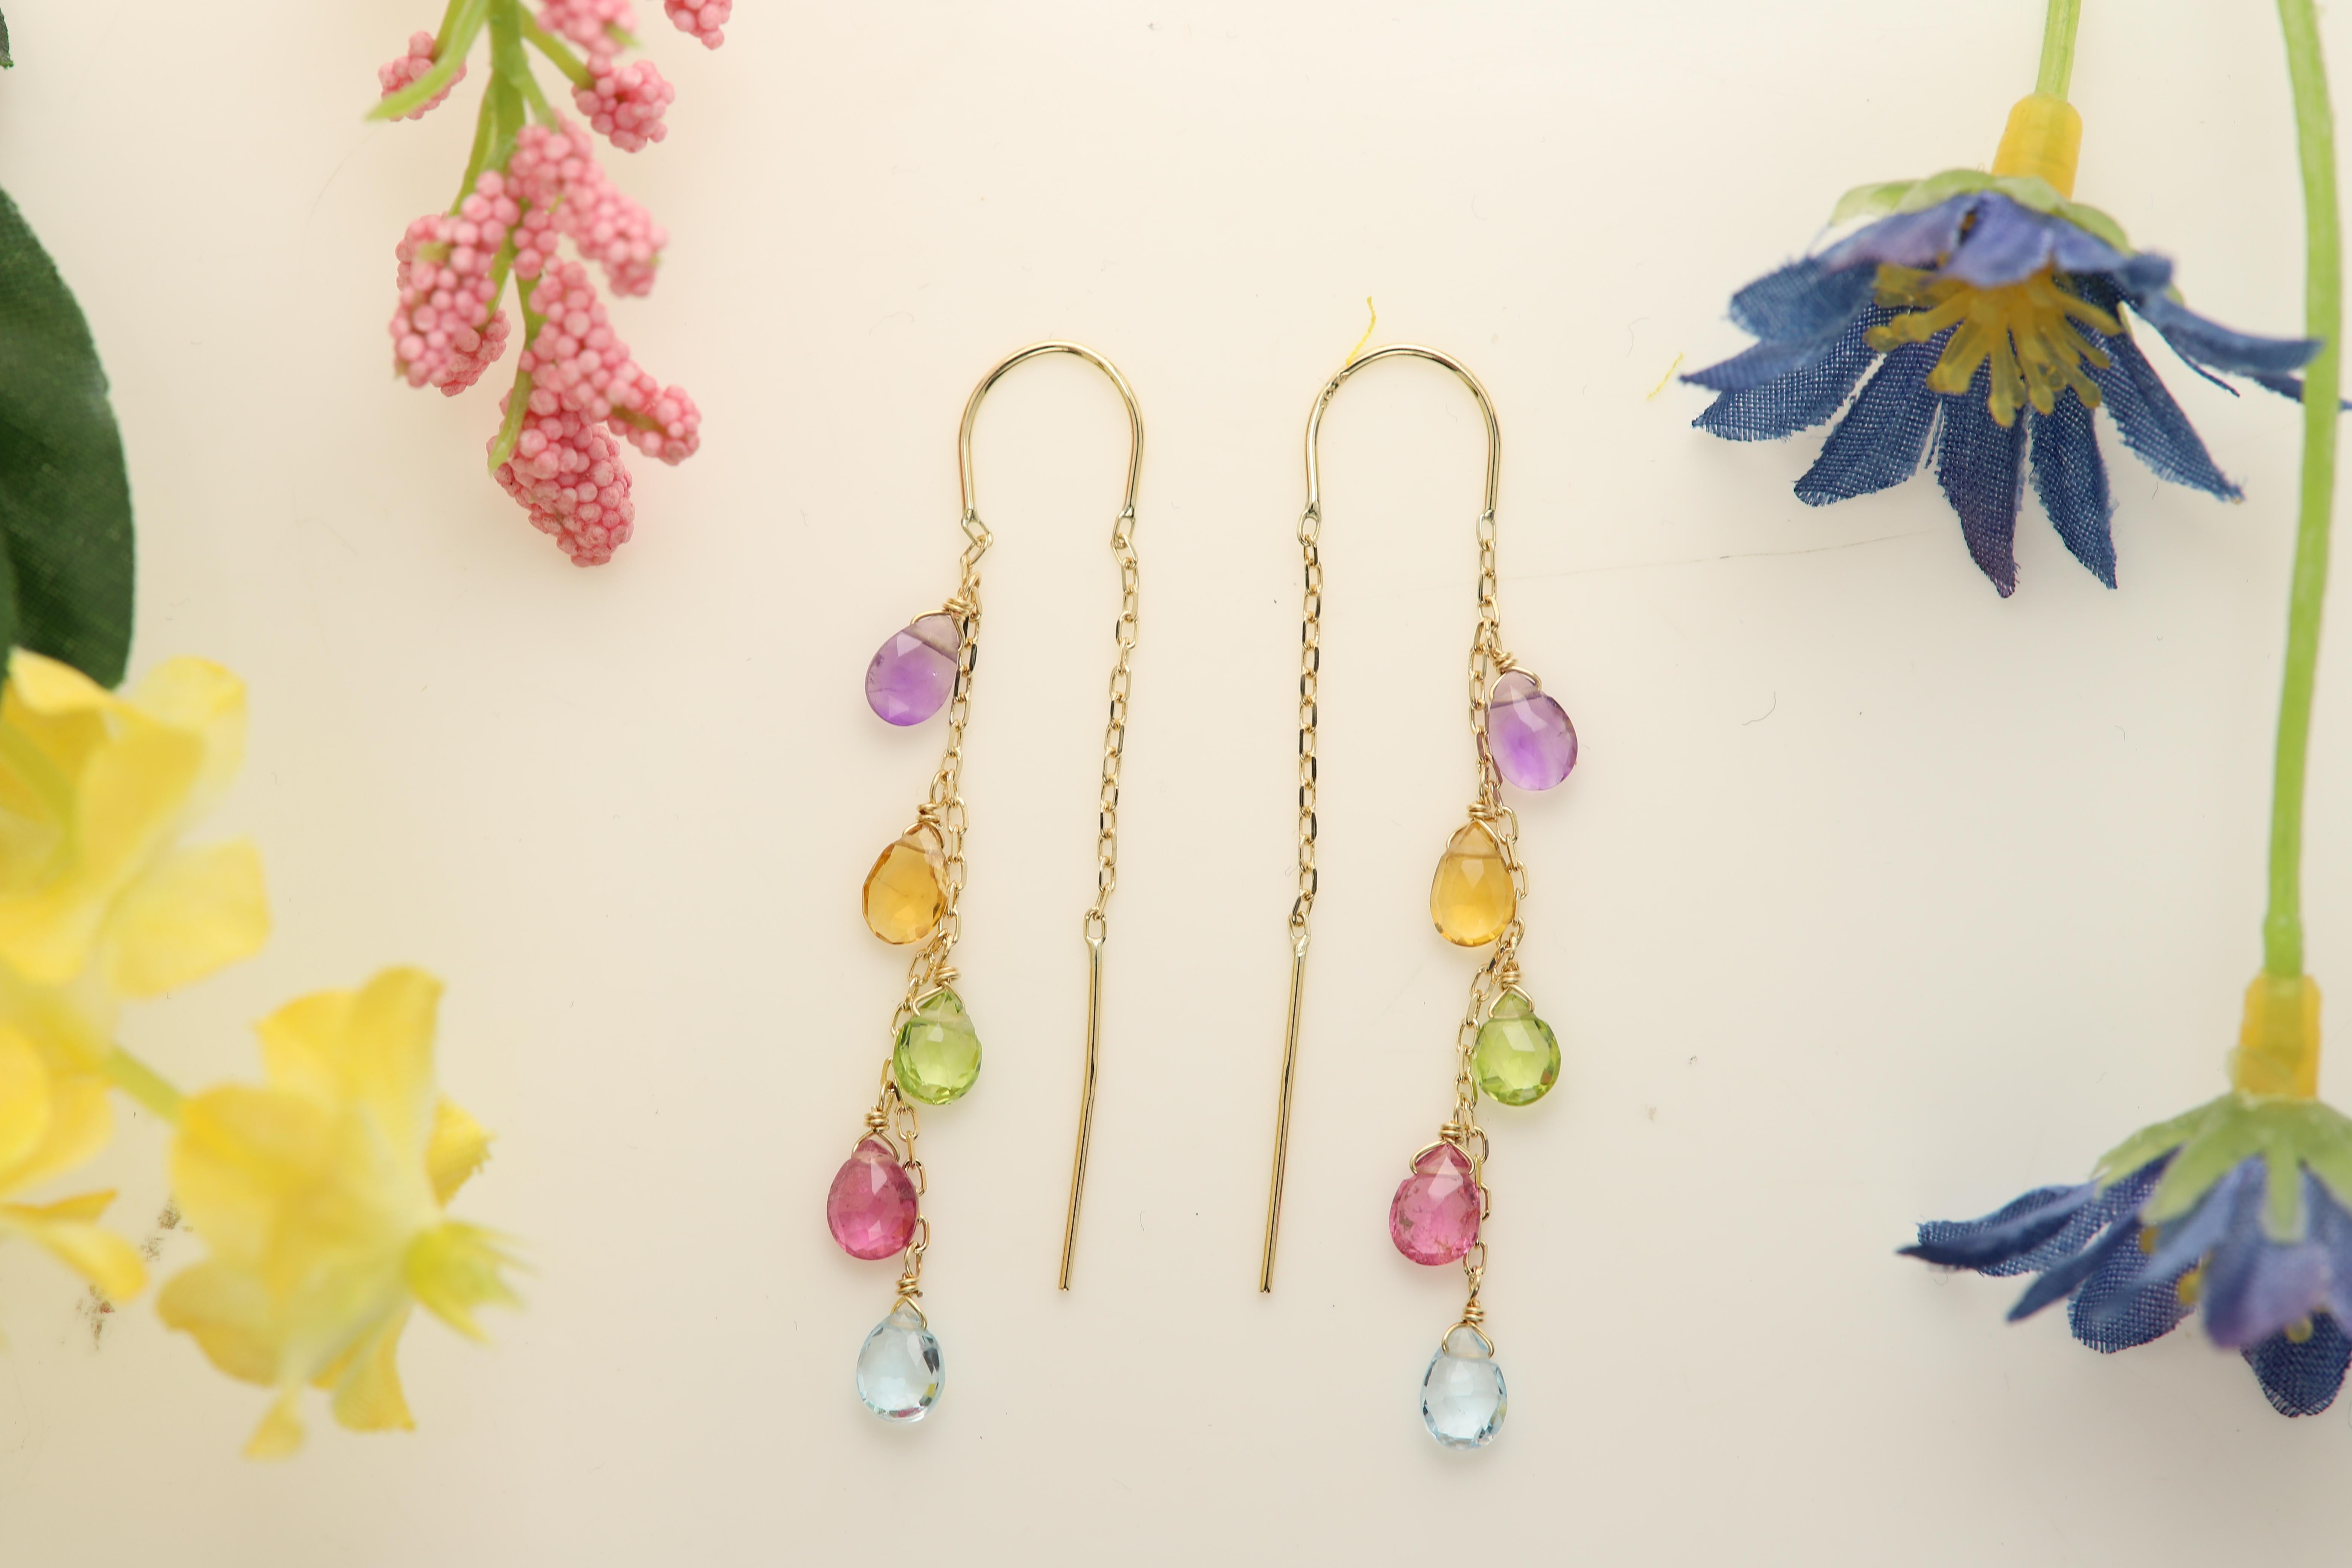 New Brilliant Elegant Dangling Earrings for Woman and Girls.
Approx. 2